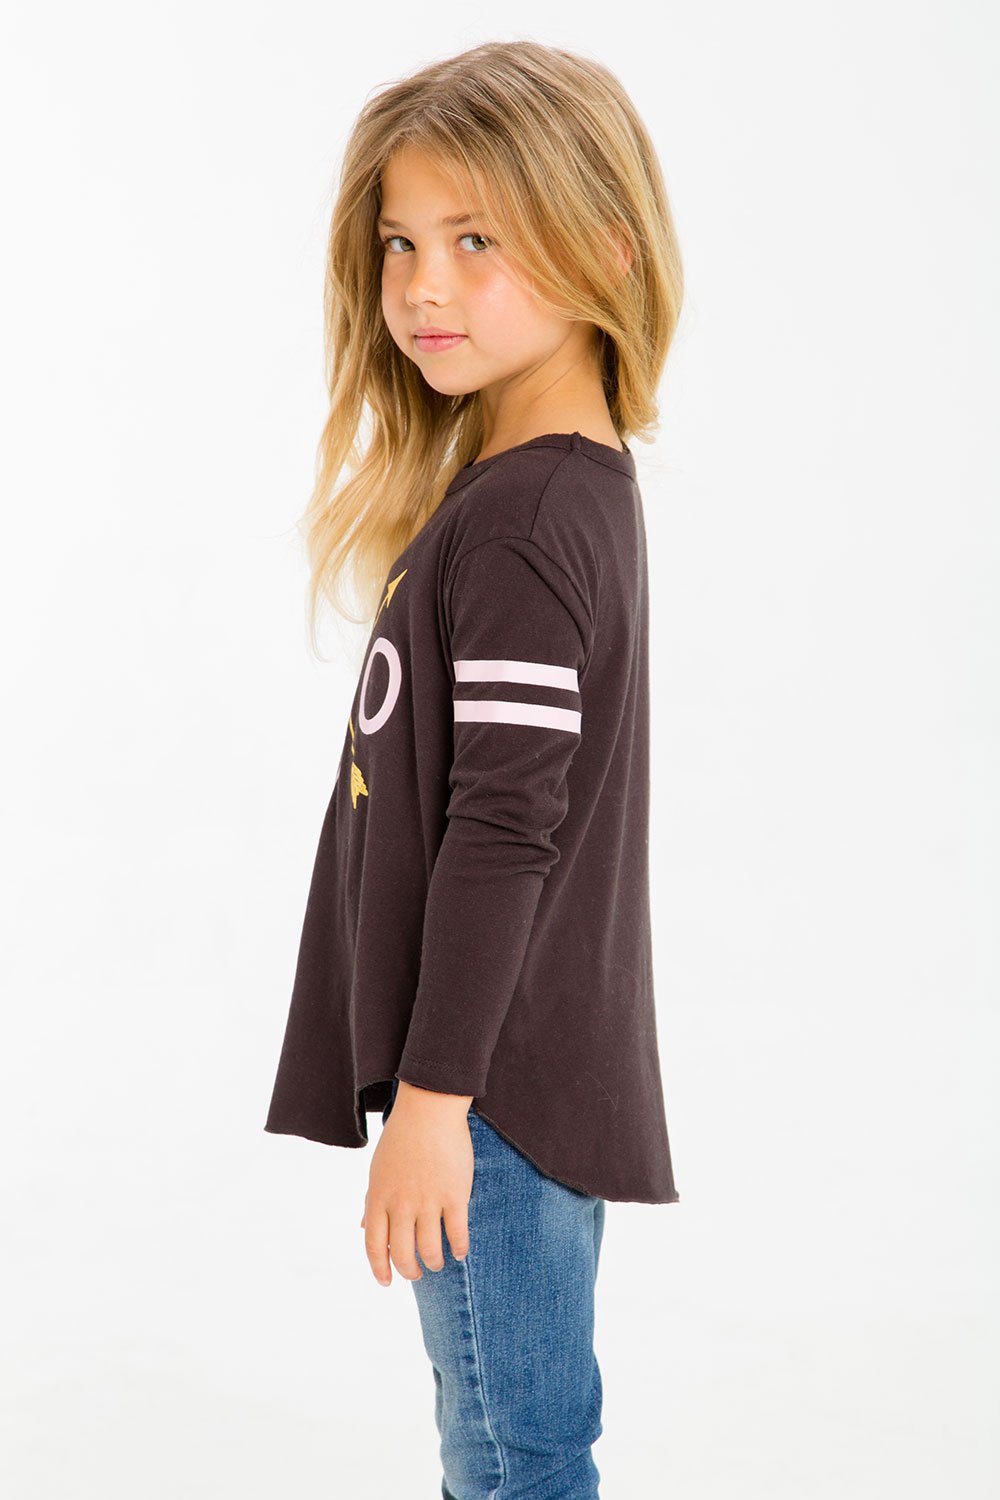 Chaser Kids - Girls High Low Shirttail in Love Arrows